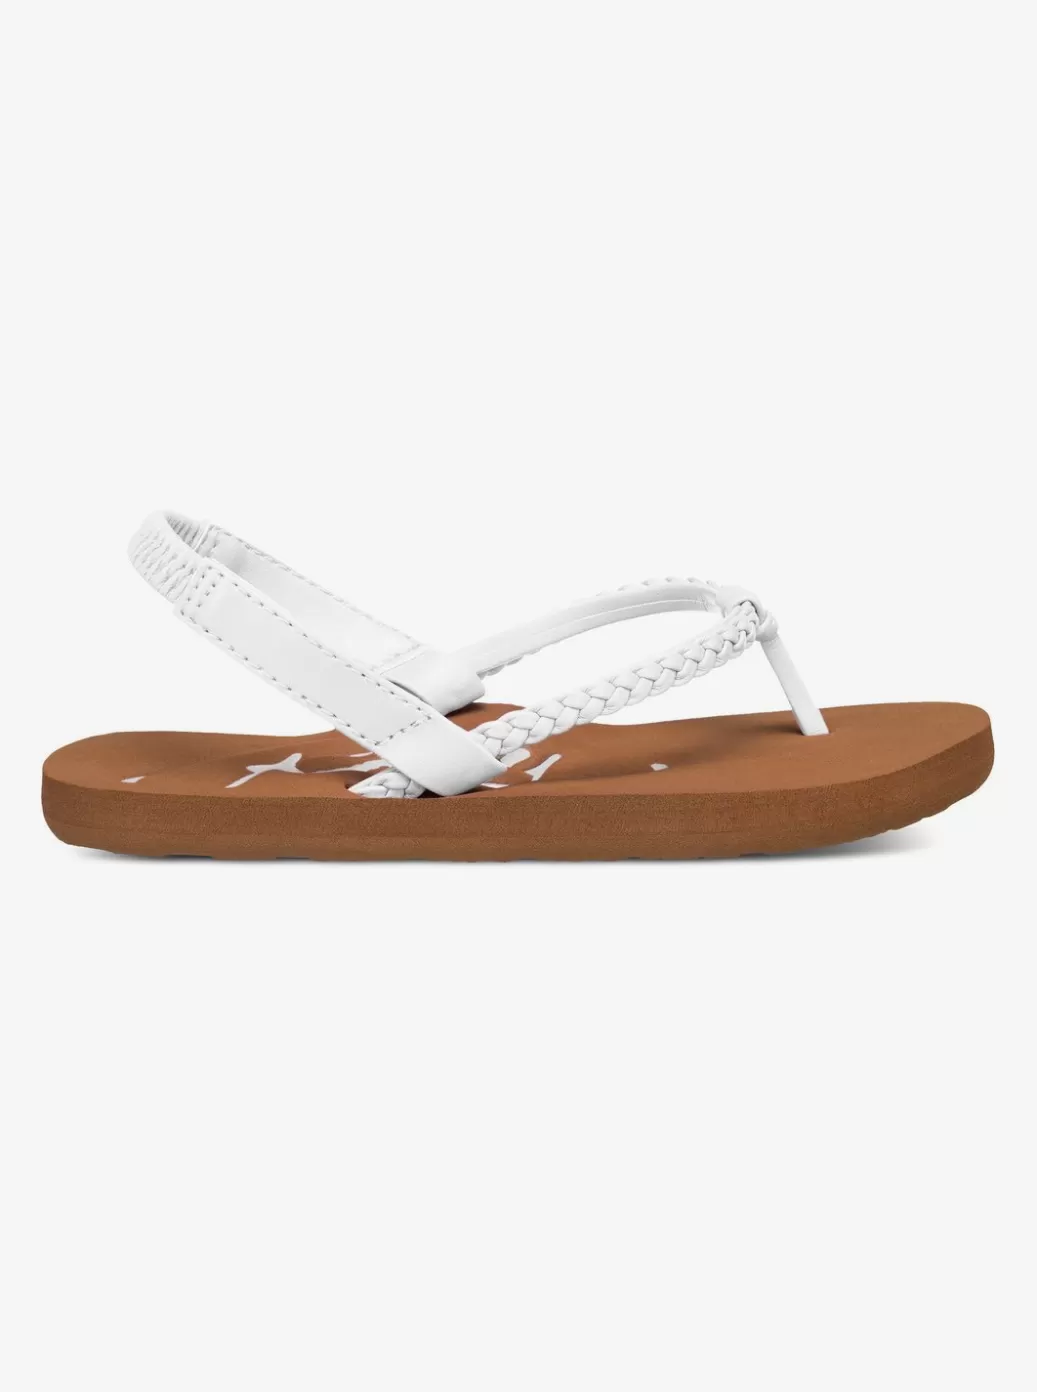 Shoes & Sandals | KIDS ROXY Girl's 2-7 Cabo Sandals White